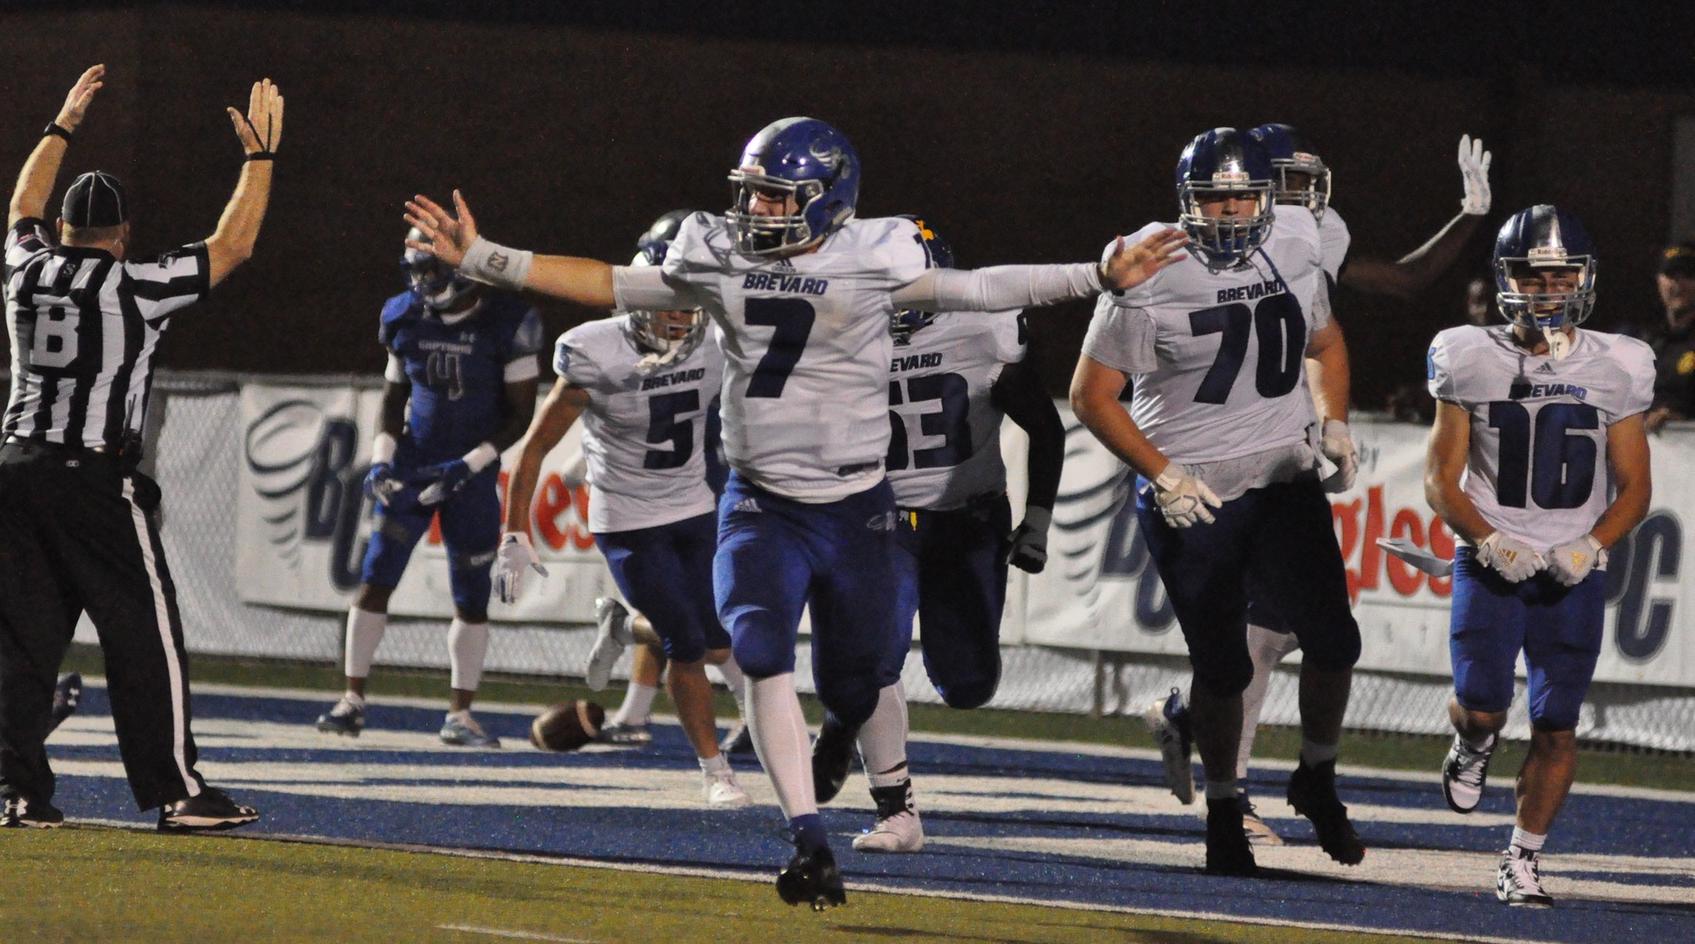 Sophomore quarterback Dalton Cole celebrates a late Tornado touchdown in a 27-6 victory over Christopher Newport on Saturday night at Brevard Memorial Stadium. Cole passed for 181 yards on 10-of-18 passing and a touchdown, while rushing for 100 yards and scoring two touchdowns (Courtesy of Tommy Moss).